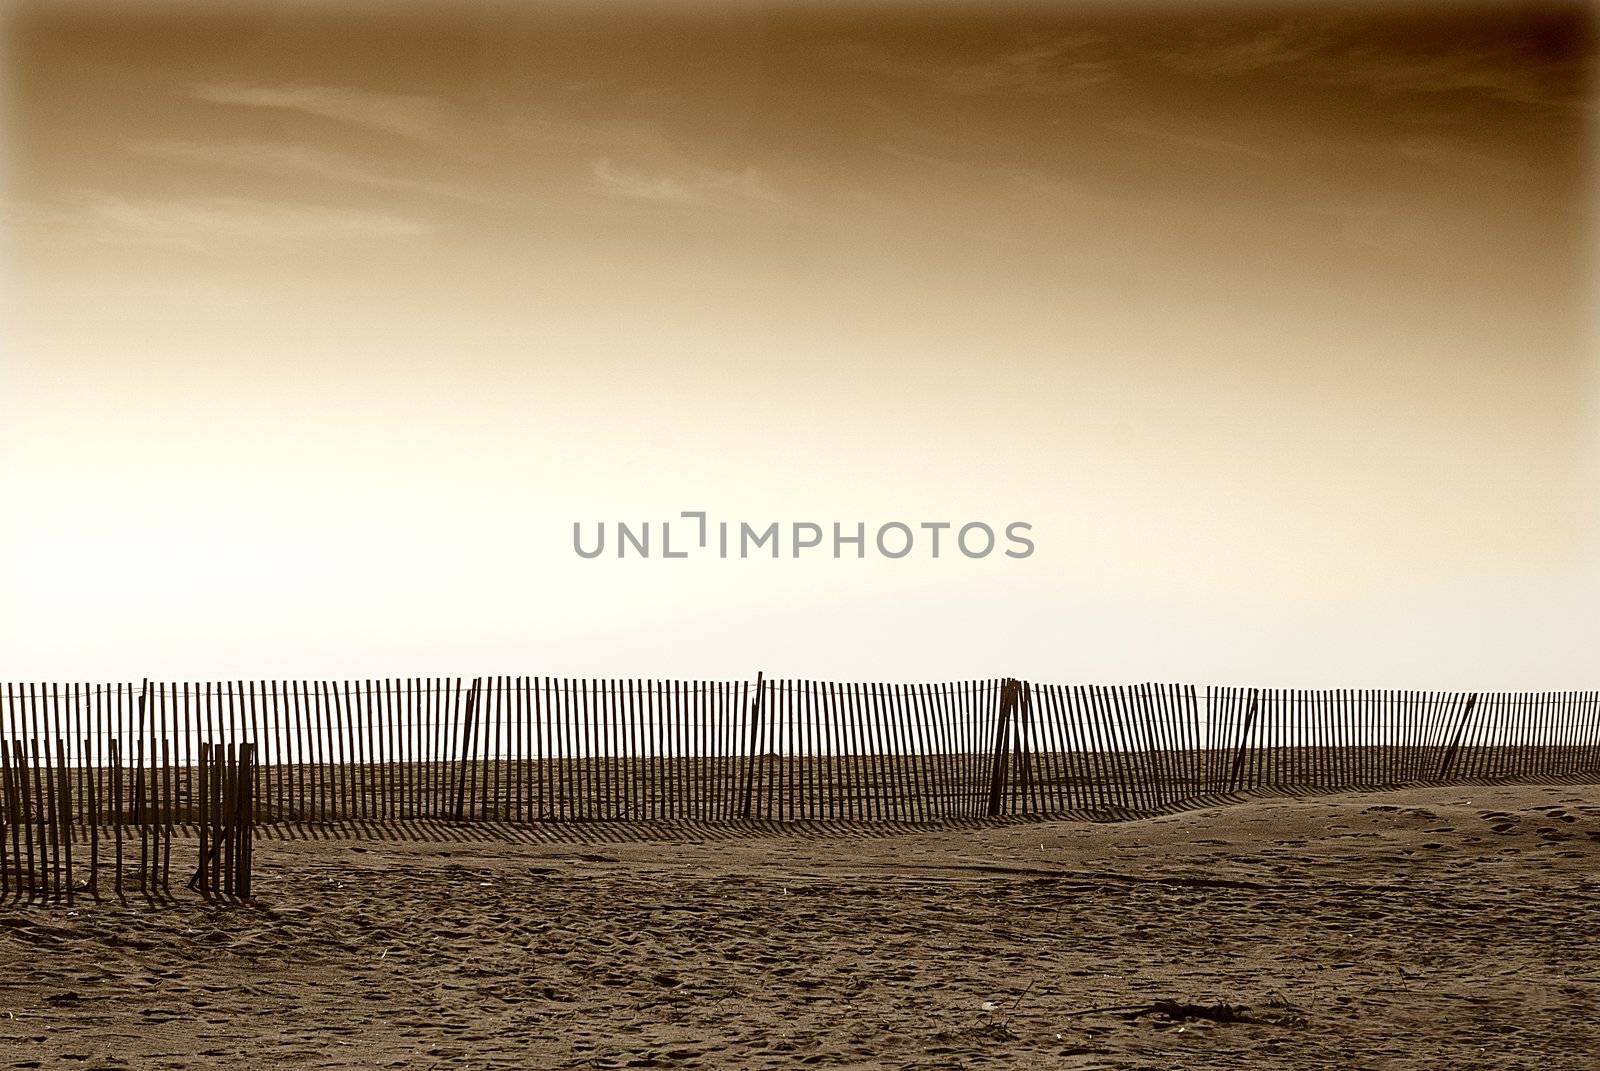 wooden fence along california sandy beach with sepia brown skies